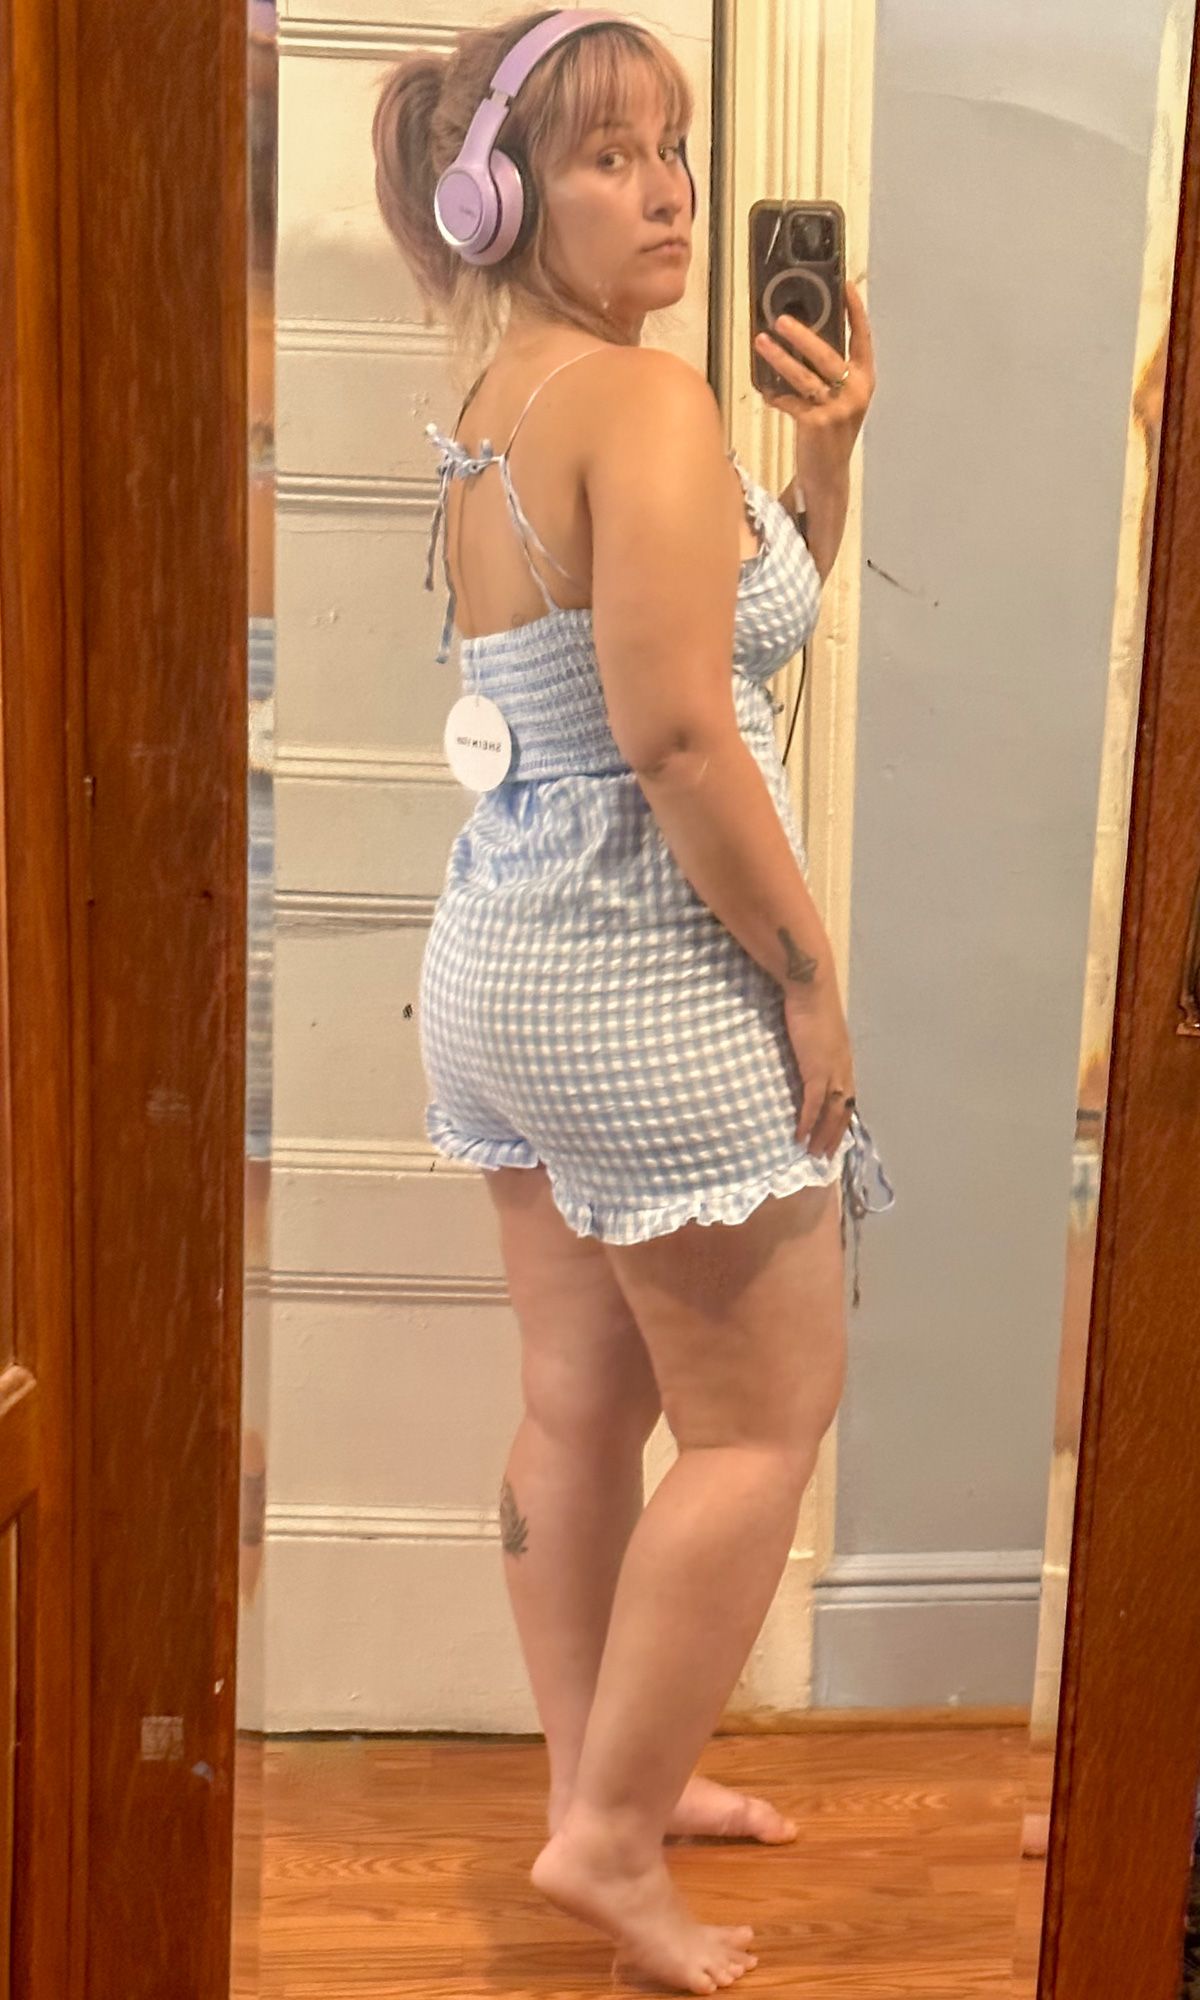 A purple-haired woman wearing a blue gingham romper takes a mirror selfie in a bedroom mirror.